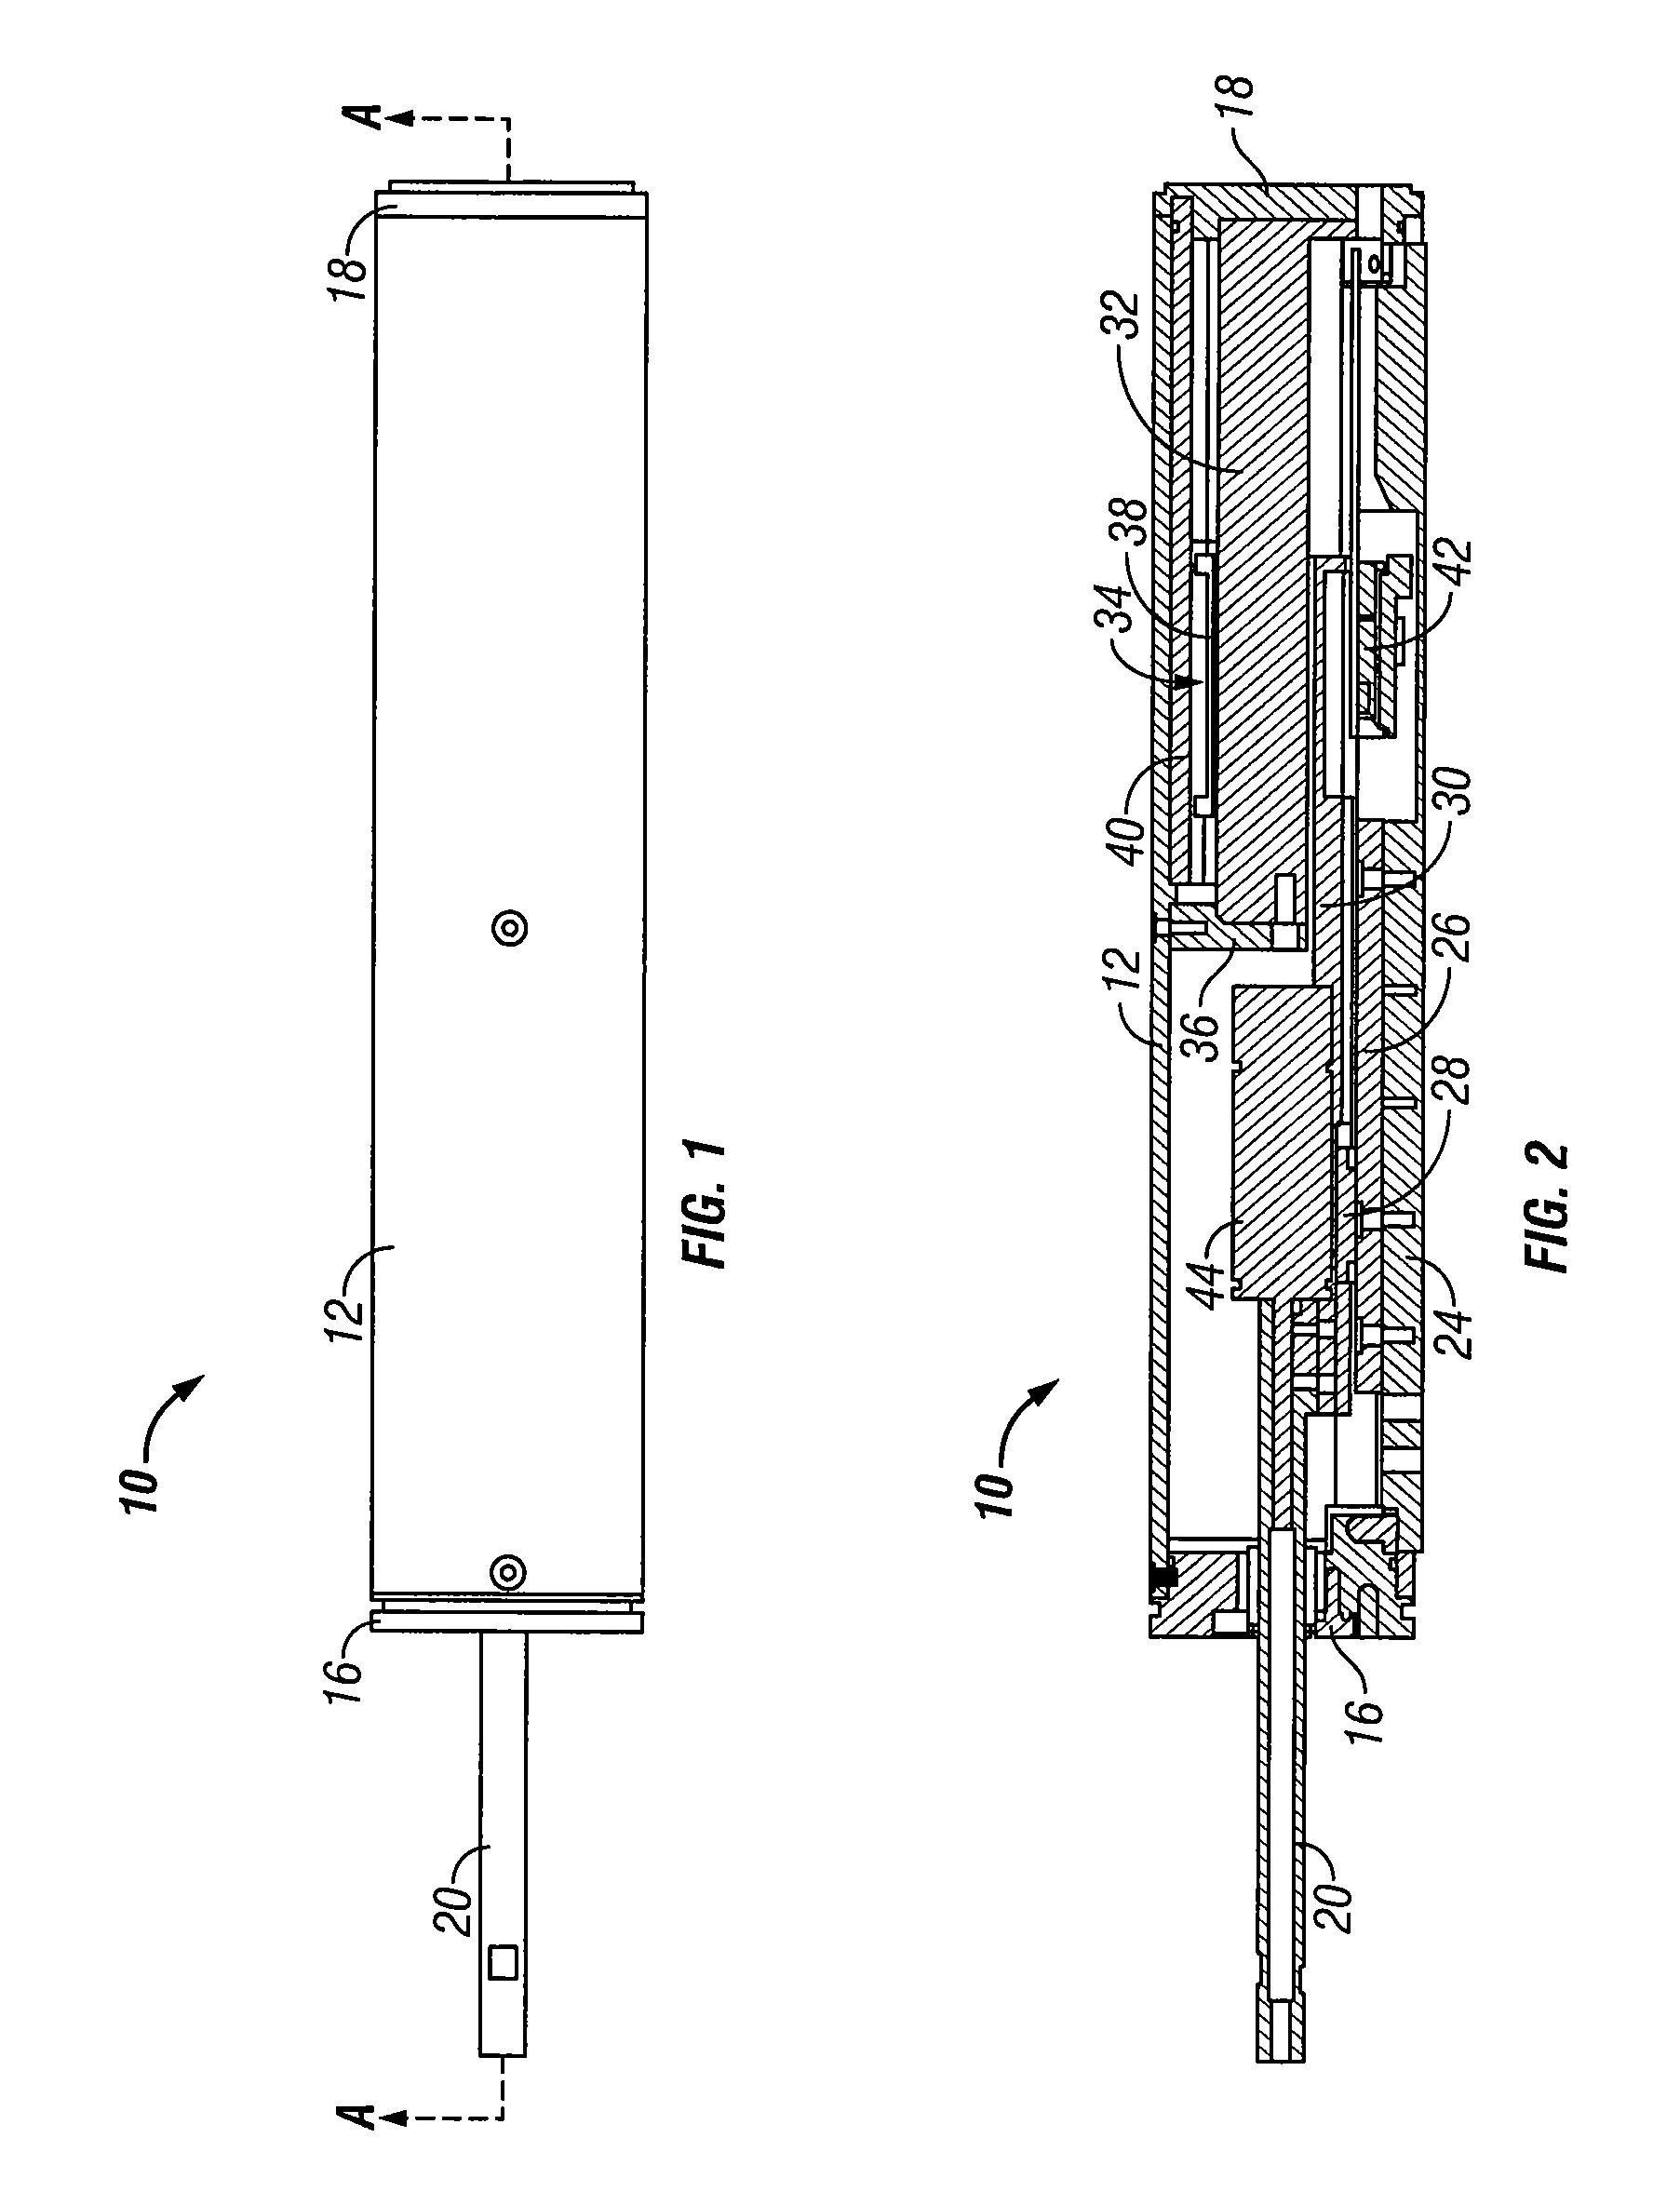 Compact linear actuator and method of making same